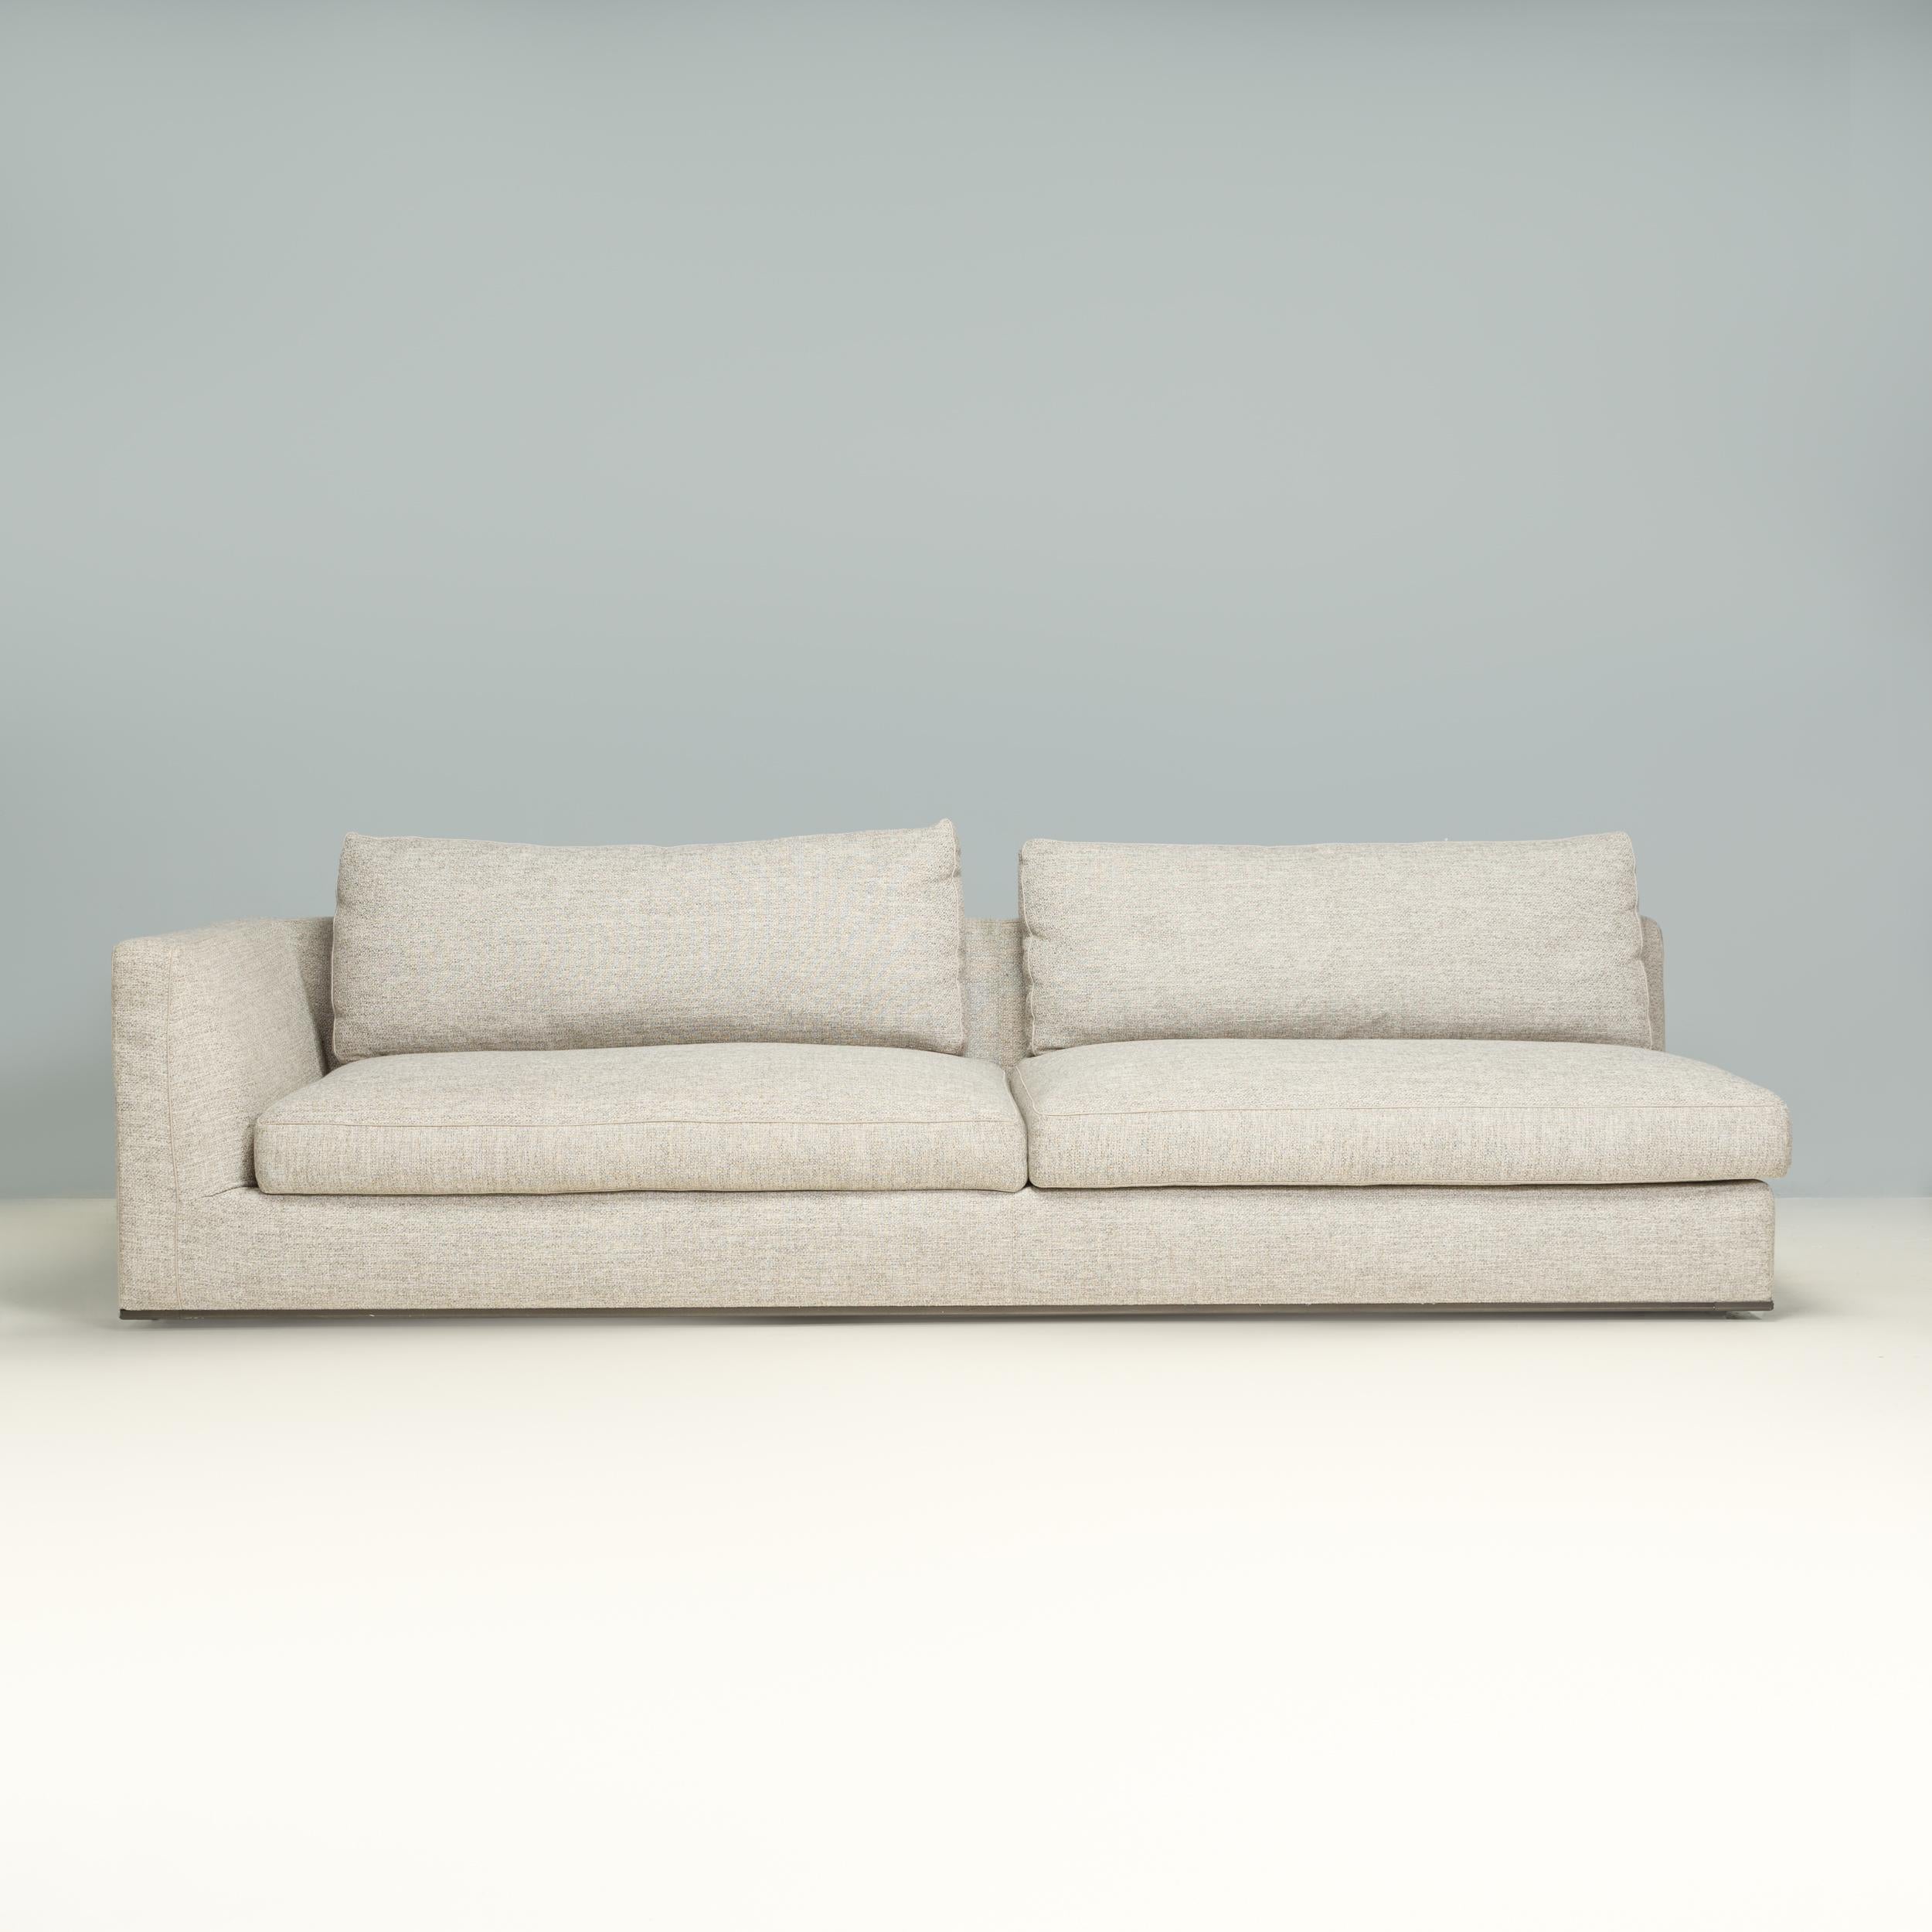 Originally designed by Antonio Citterio for B&B Italia in 2016, the Richard sofa is a fantastic example of contemporary Italian design.

The sectional sofa has a corner configuration with a separate two seat sofa modules and additional two seat